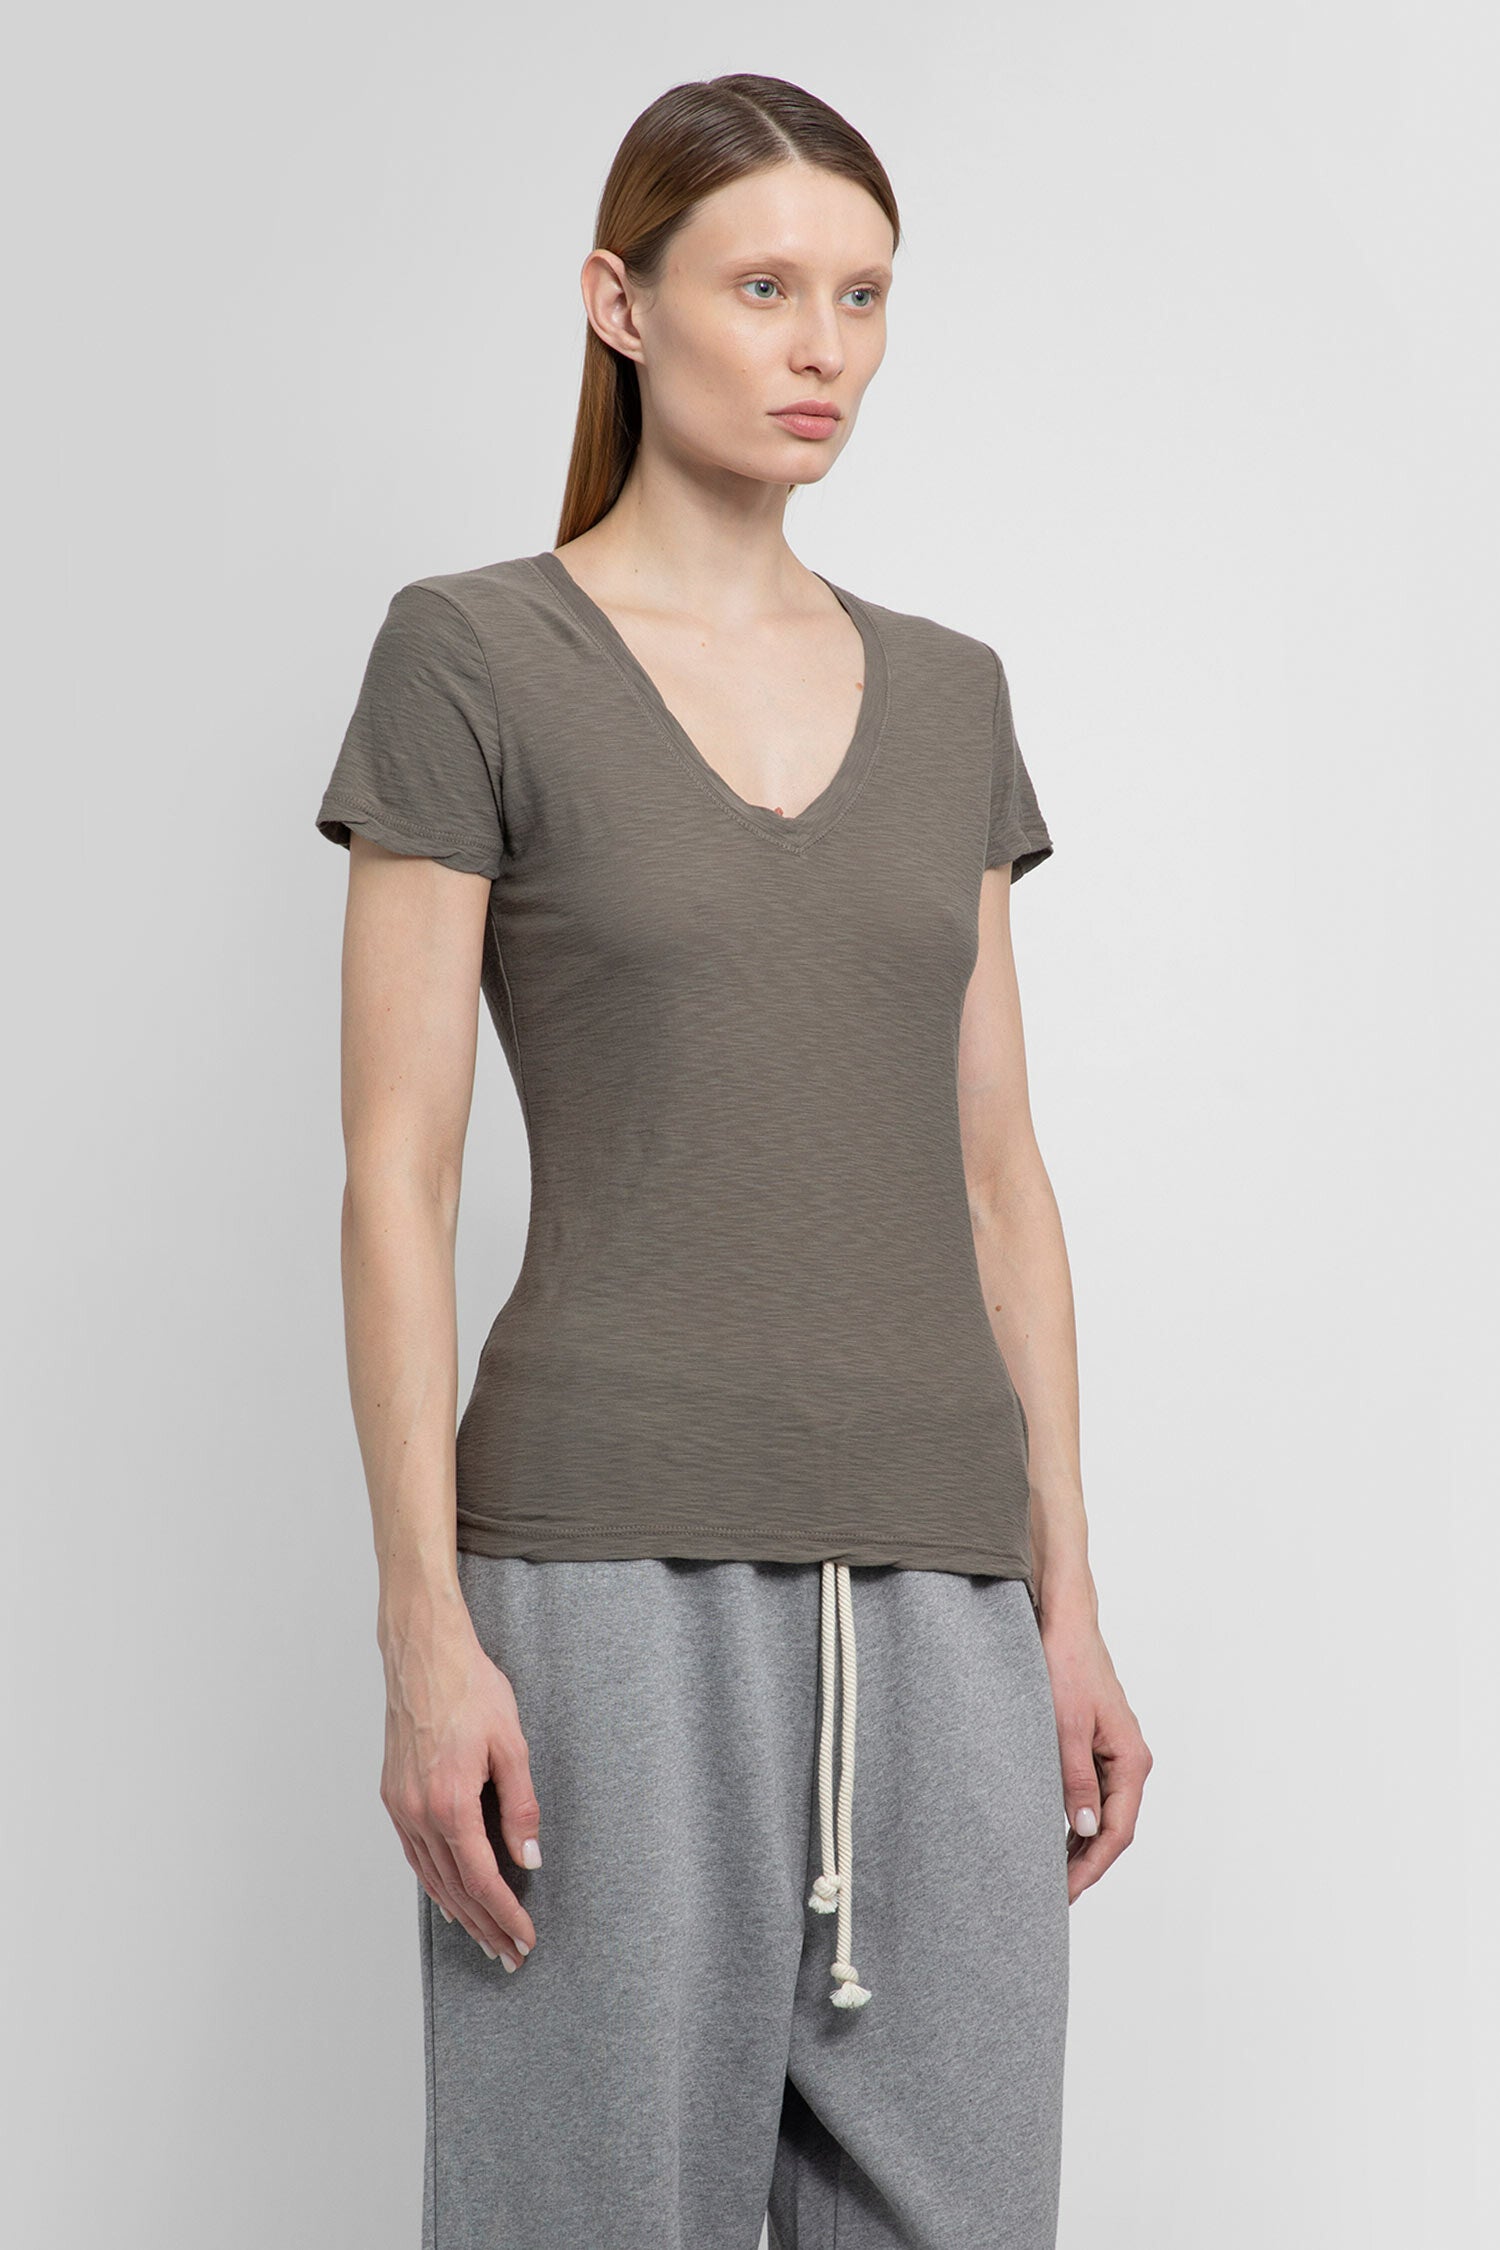 JAMES PERSE WOMAN BEIGE T-SHIRTS & TANK TOPS